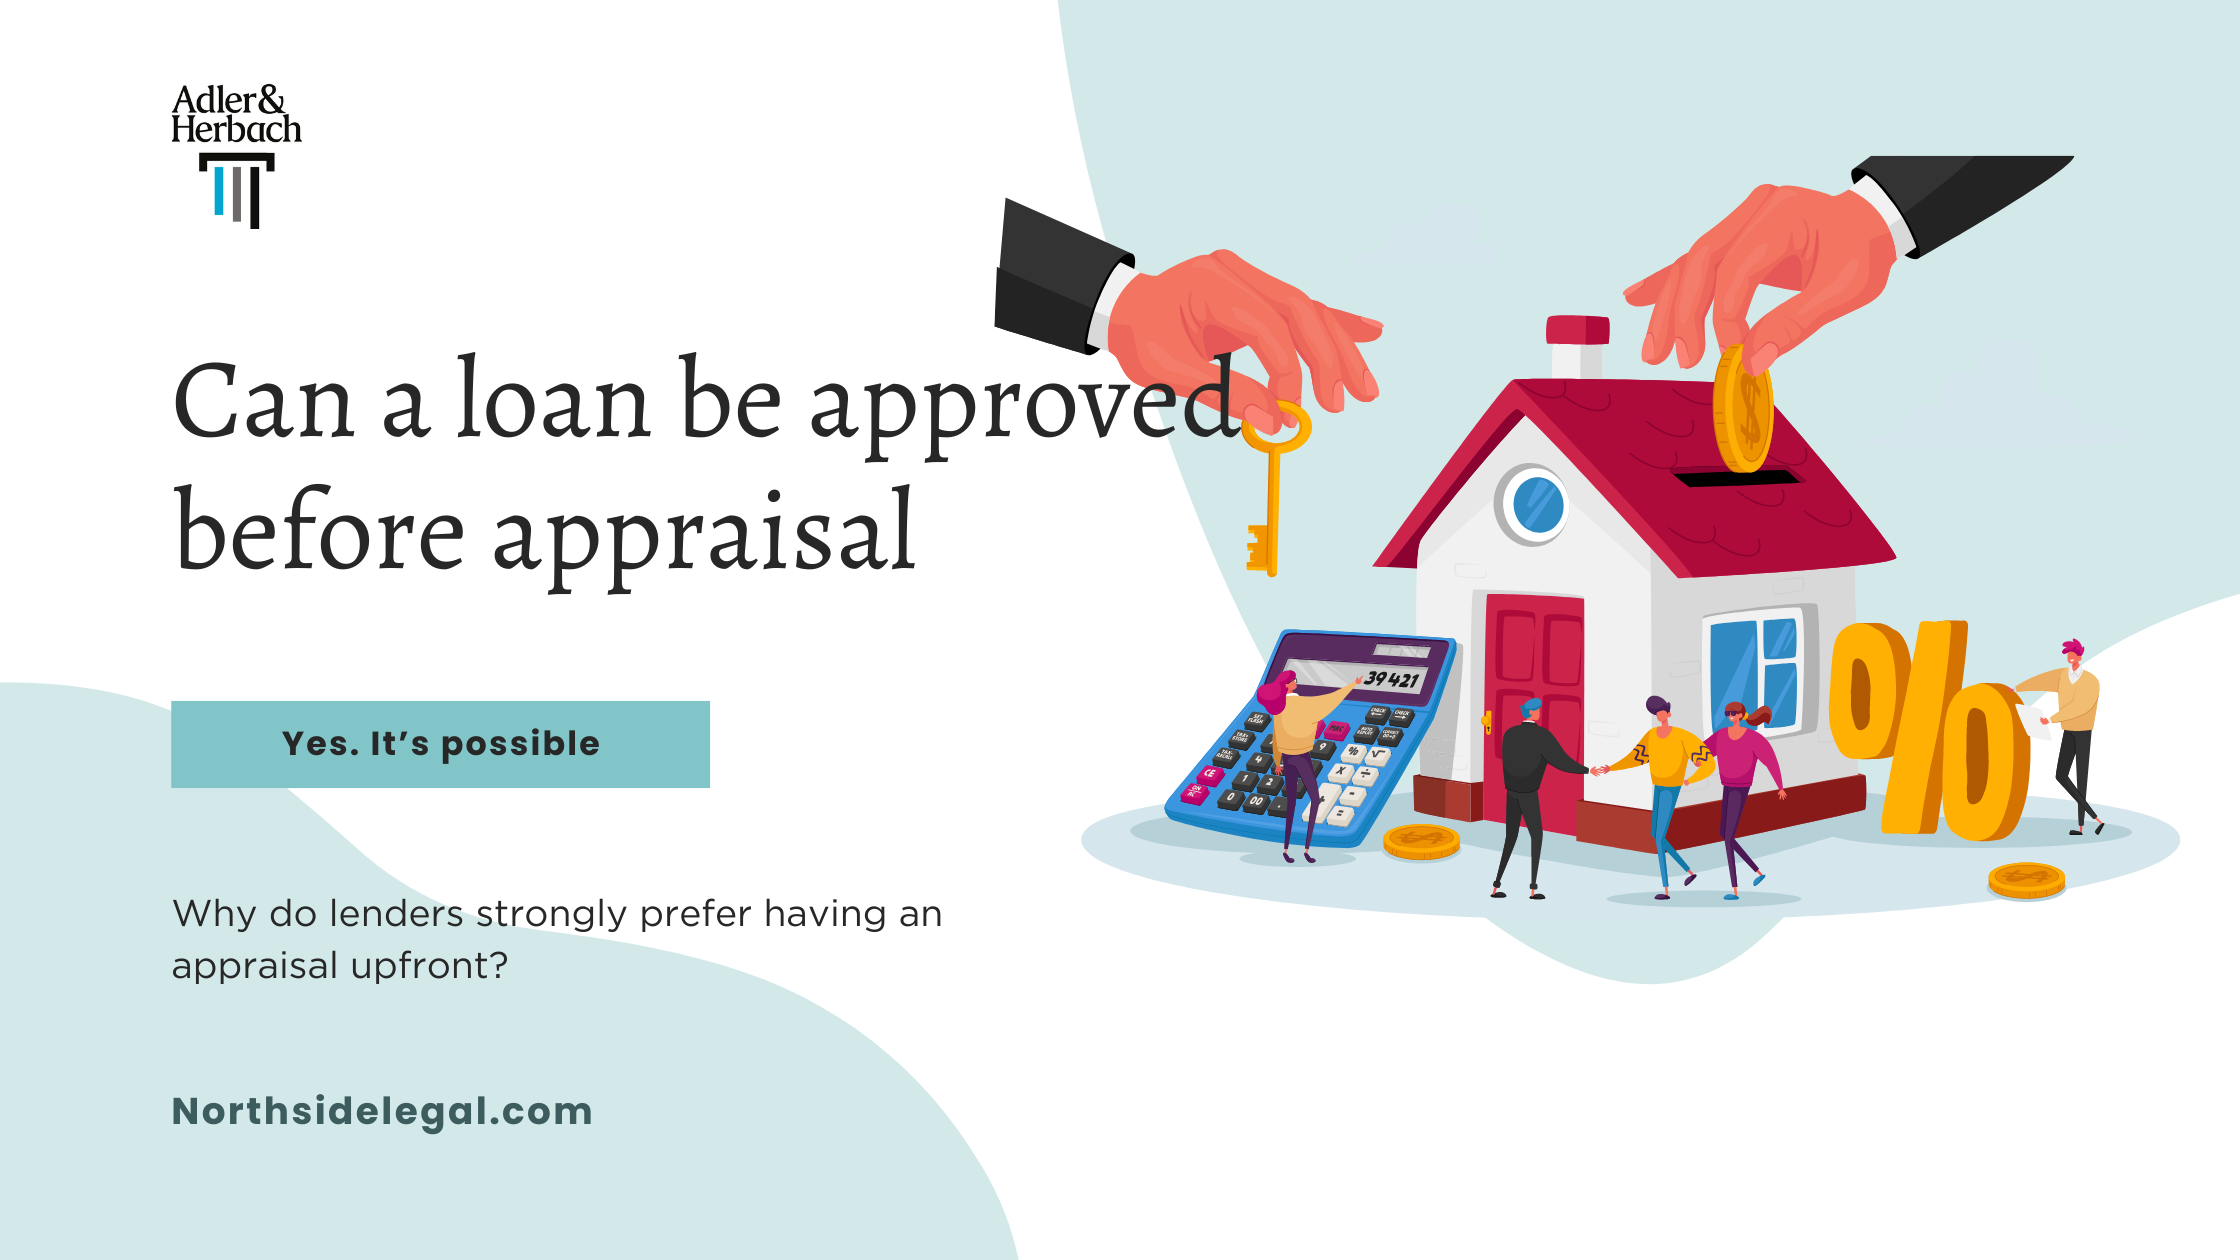 Can a loan be approved before appraisal?